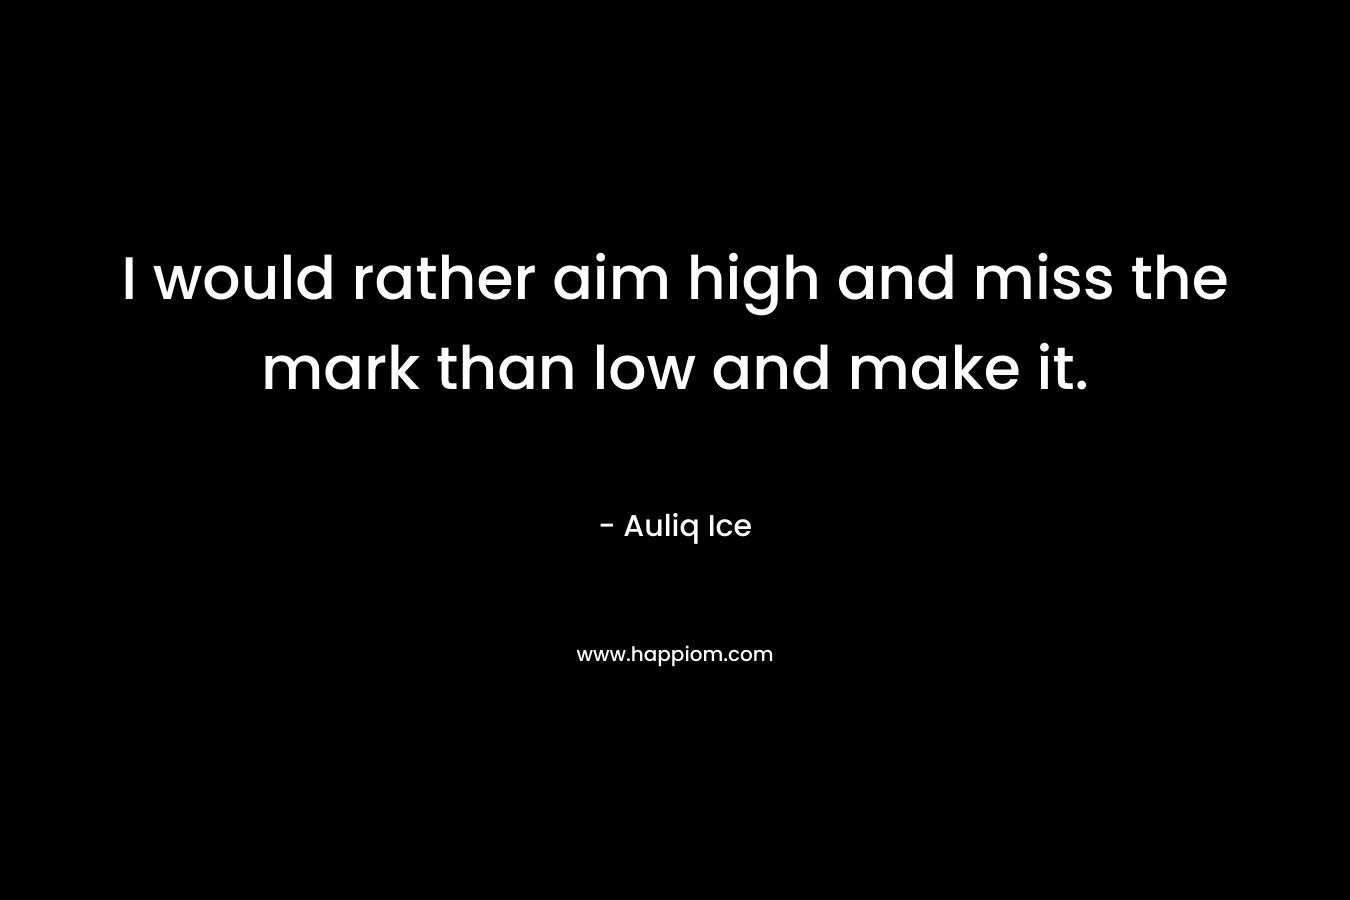 I would rather aim high and miss the mark than low and make it.